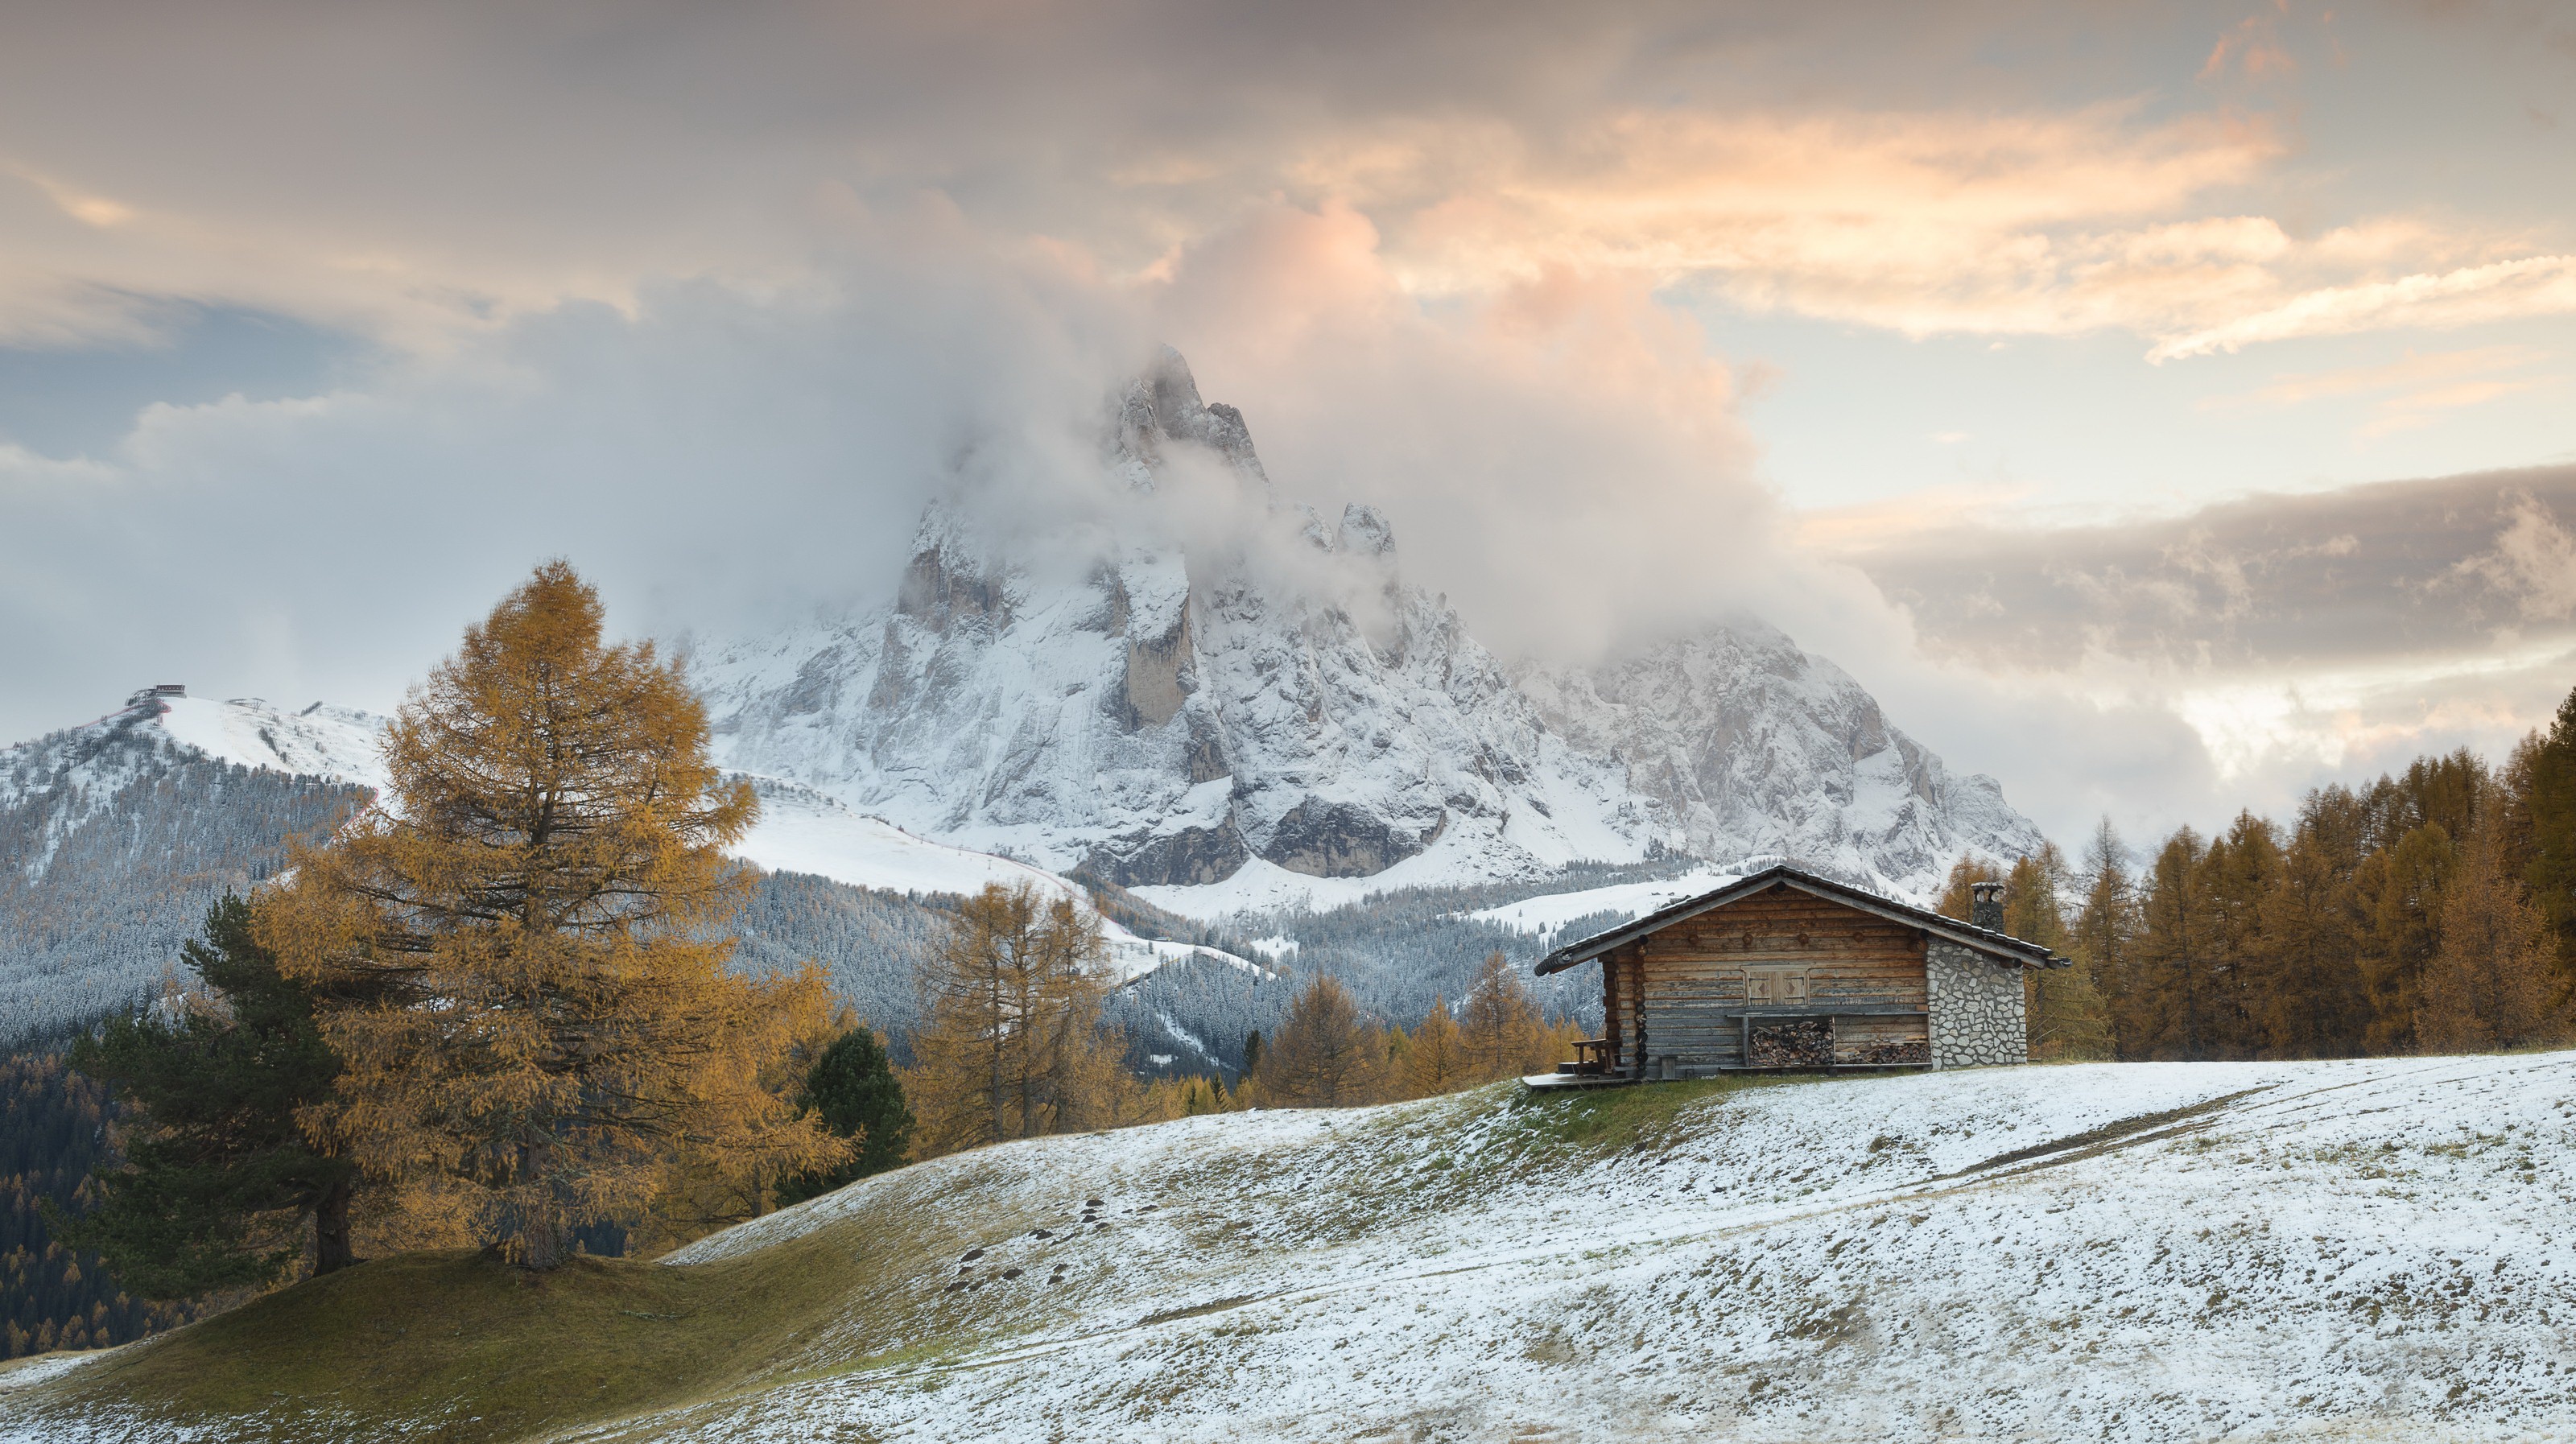 General 3200x1794 hut winter mountains nature outdoors clouds cabin